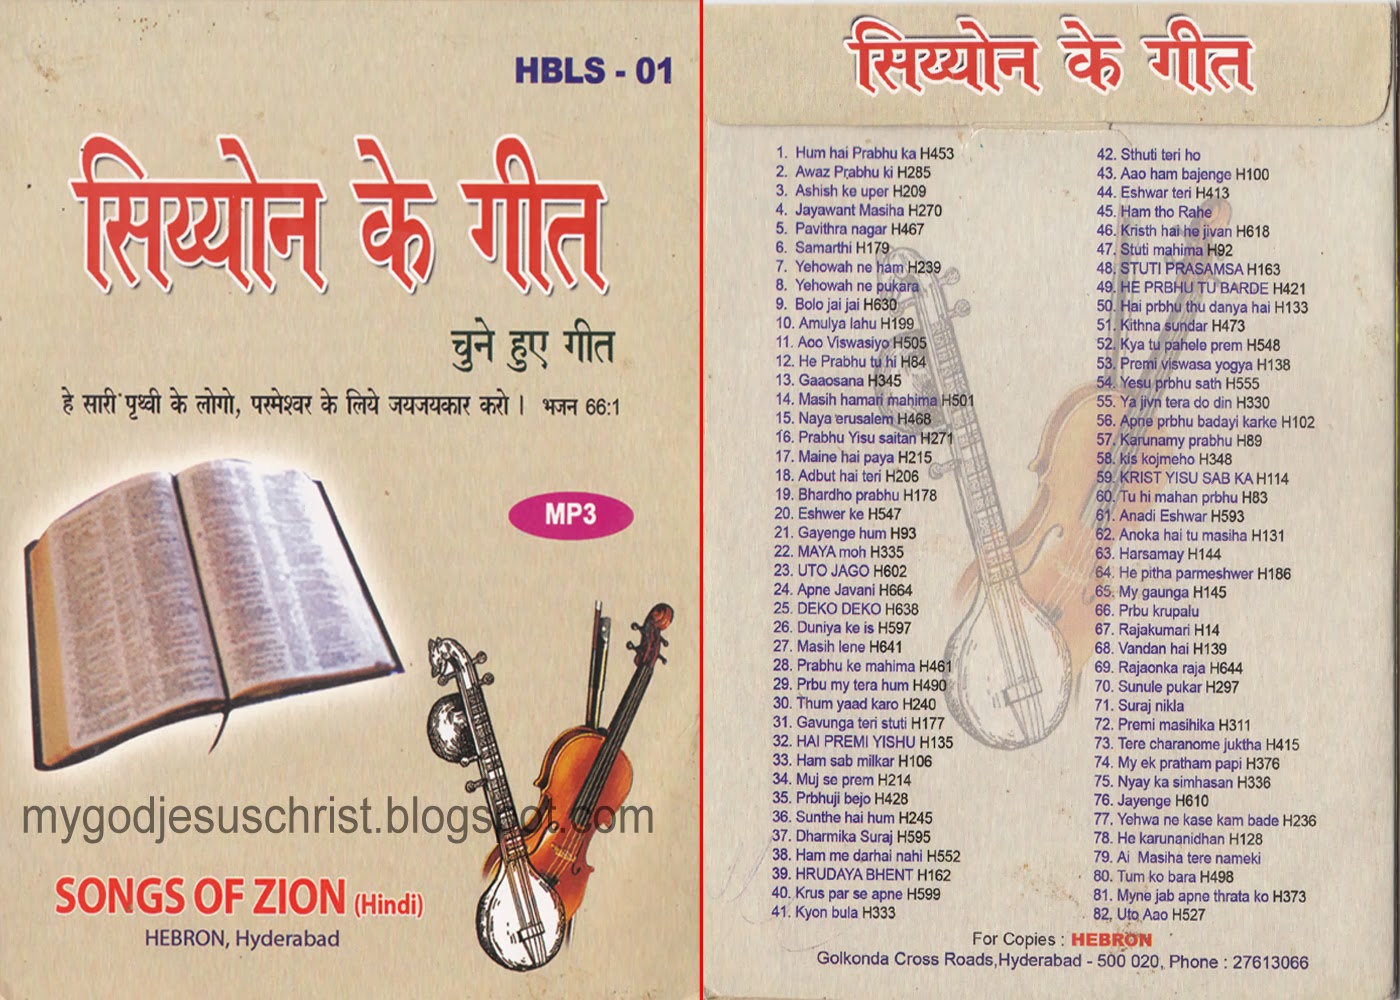 SONGS OF ZION HINDI Christian Songs Free Download 